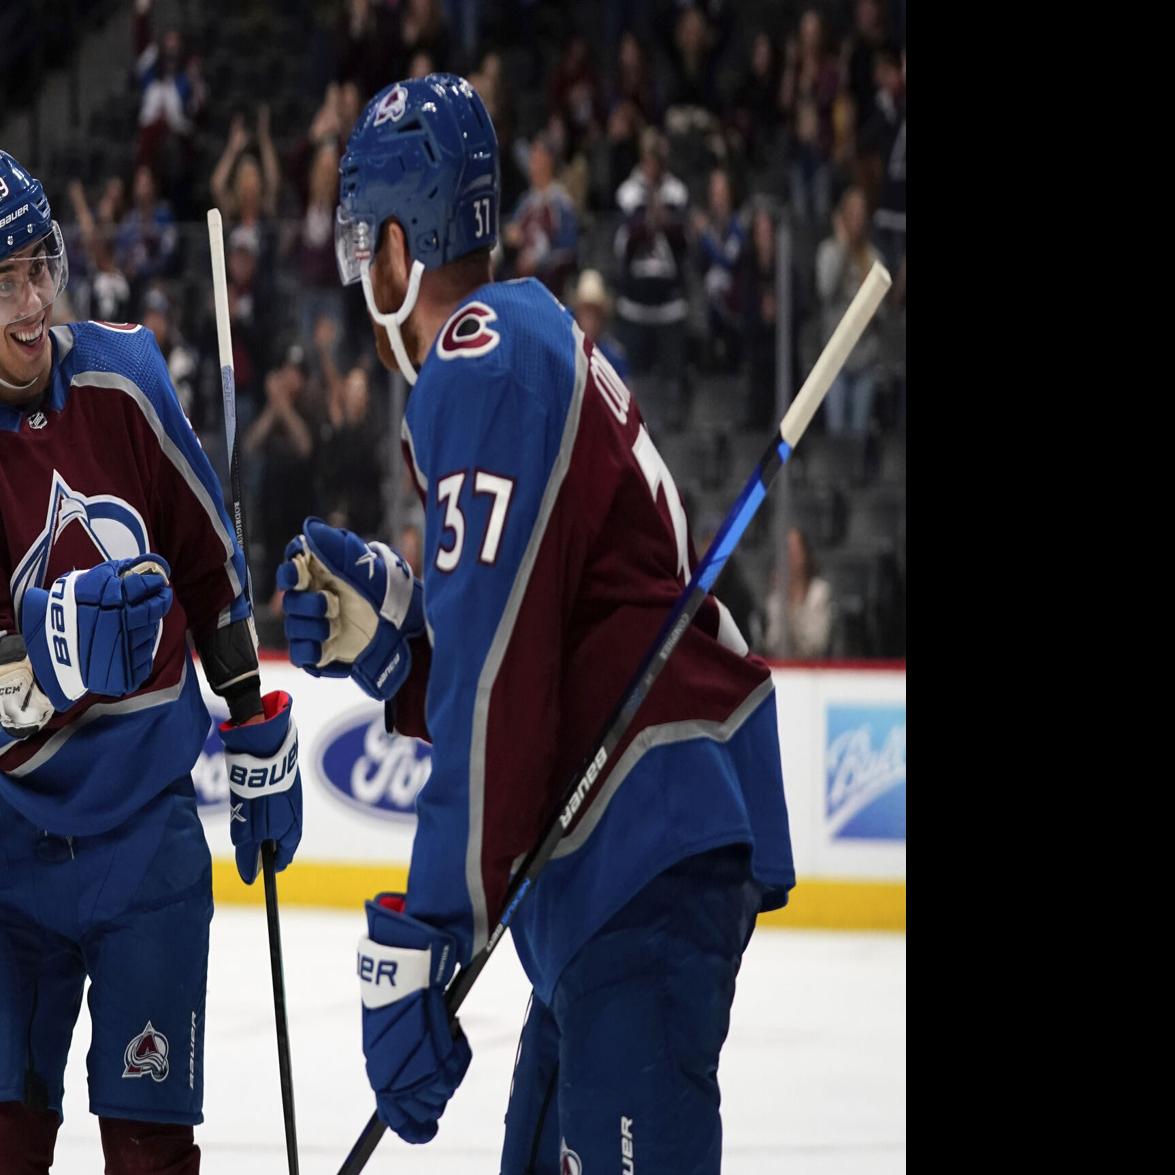 Taking a look at the 2022-23 Colorado Avalanche roster